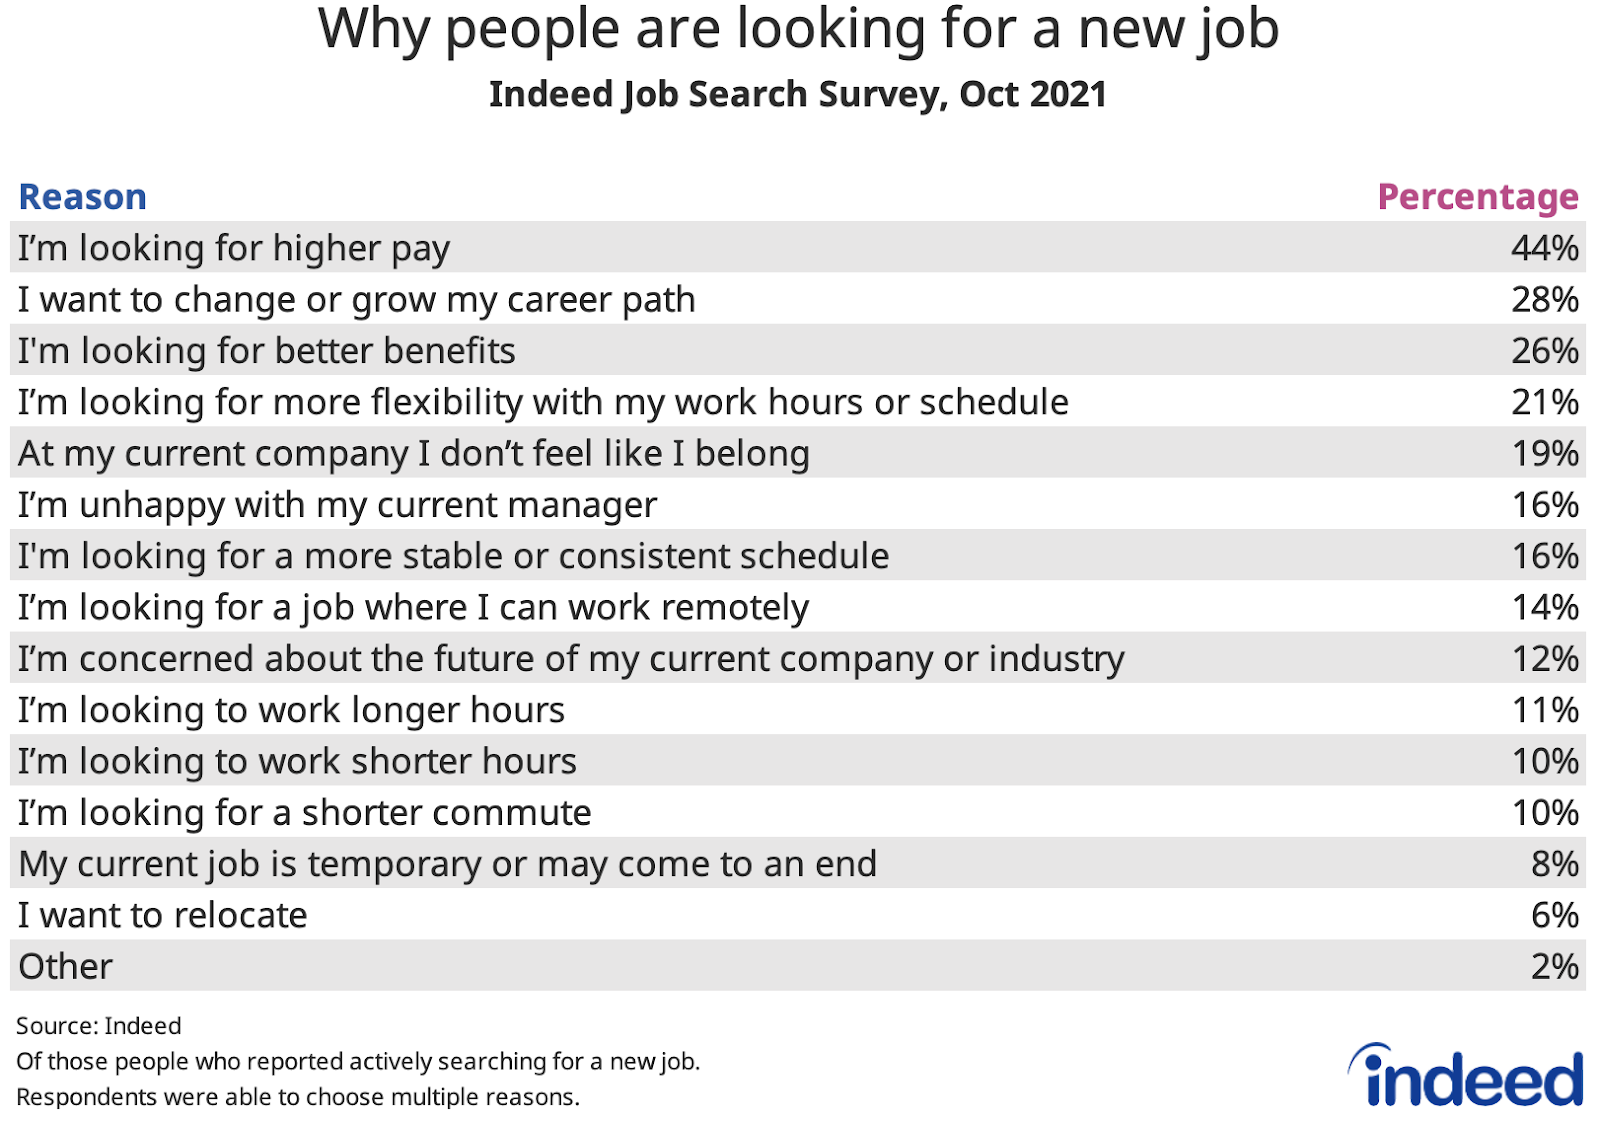 Table titled “Why people are looking for a new job.”